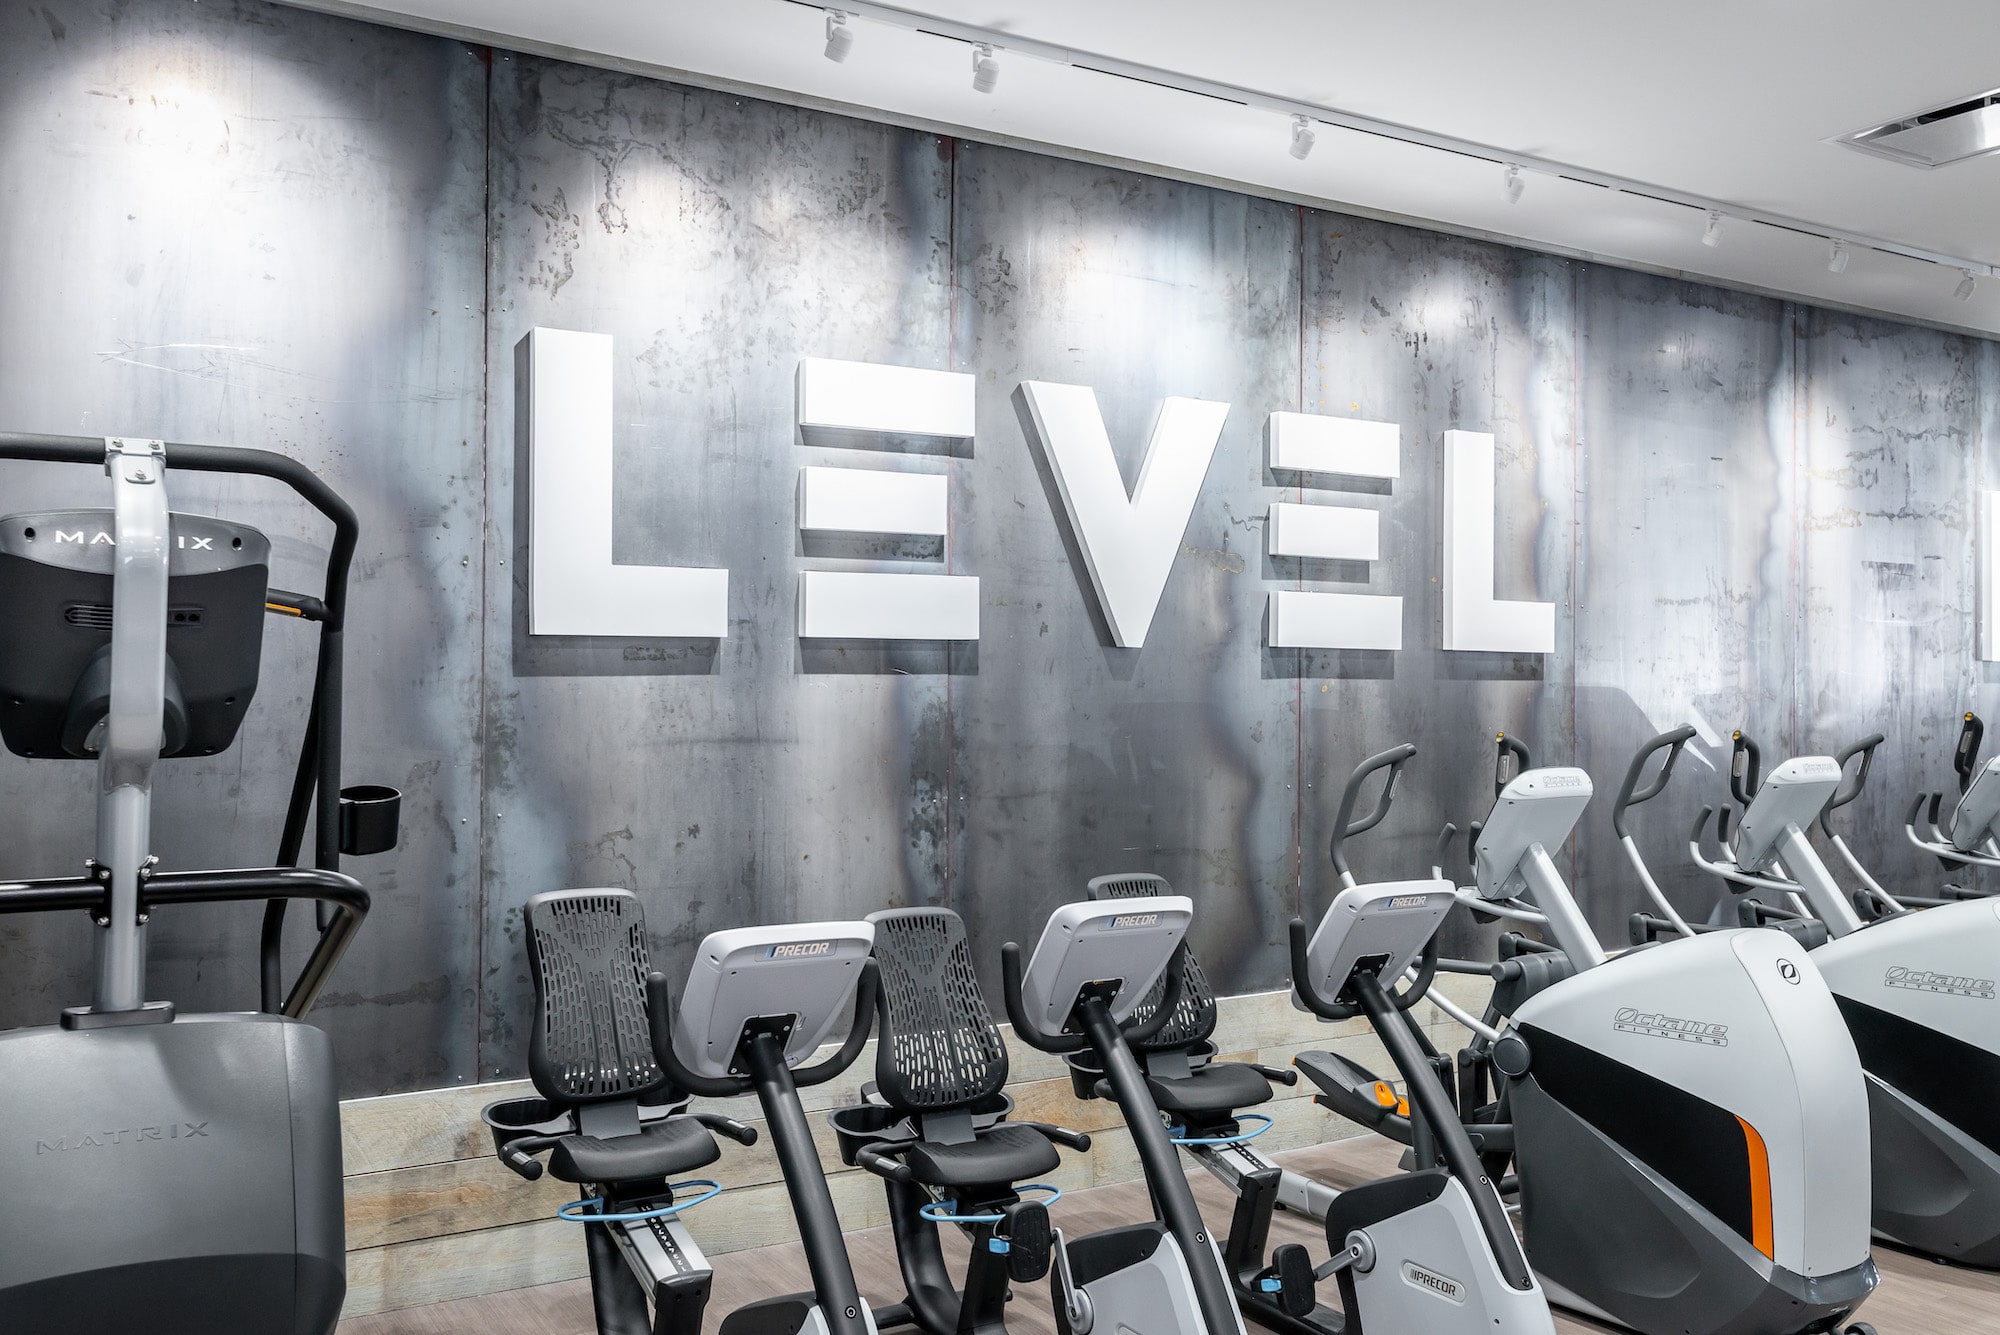 Top of the line cardio equipment at Level Fitness Club premier full-service gym in Yorktown